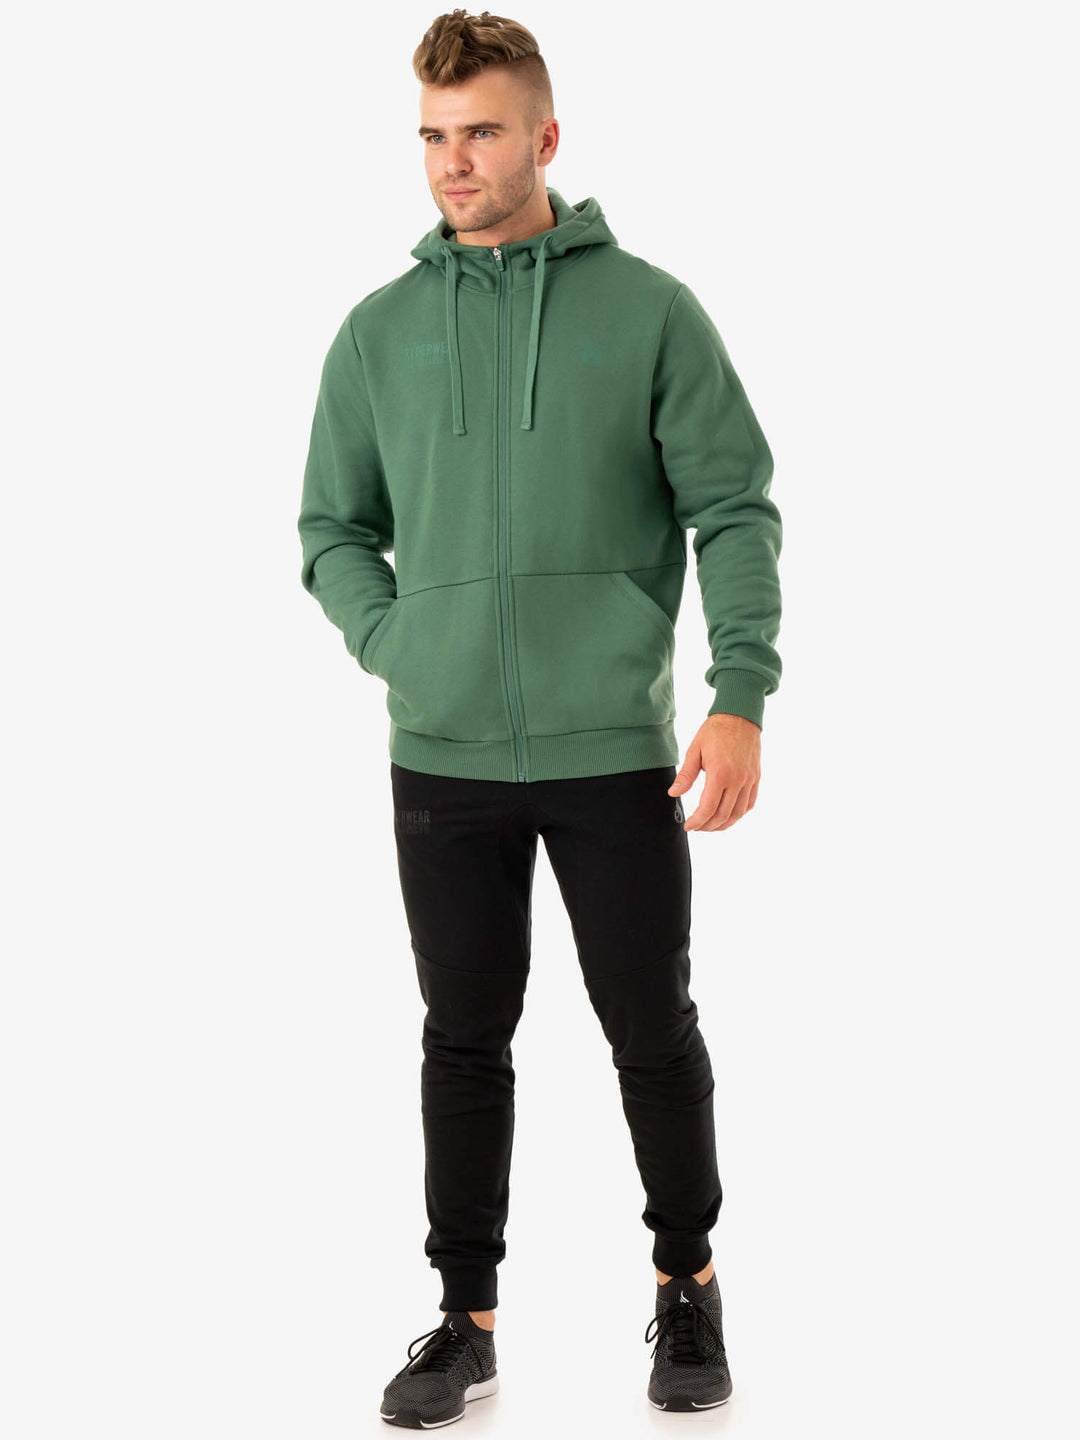 Limitless Zip Up Jacket - Forest Green Clothing Ryderwear 